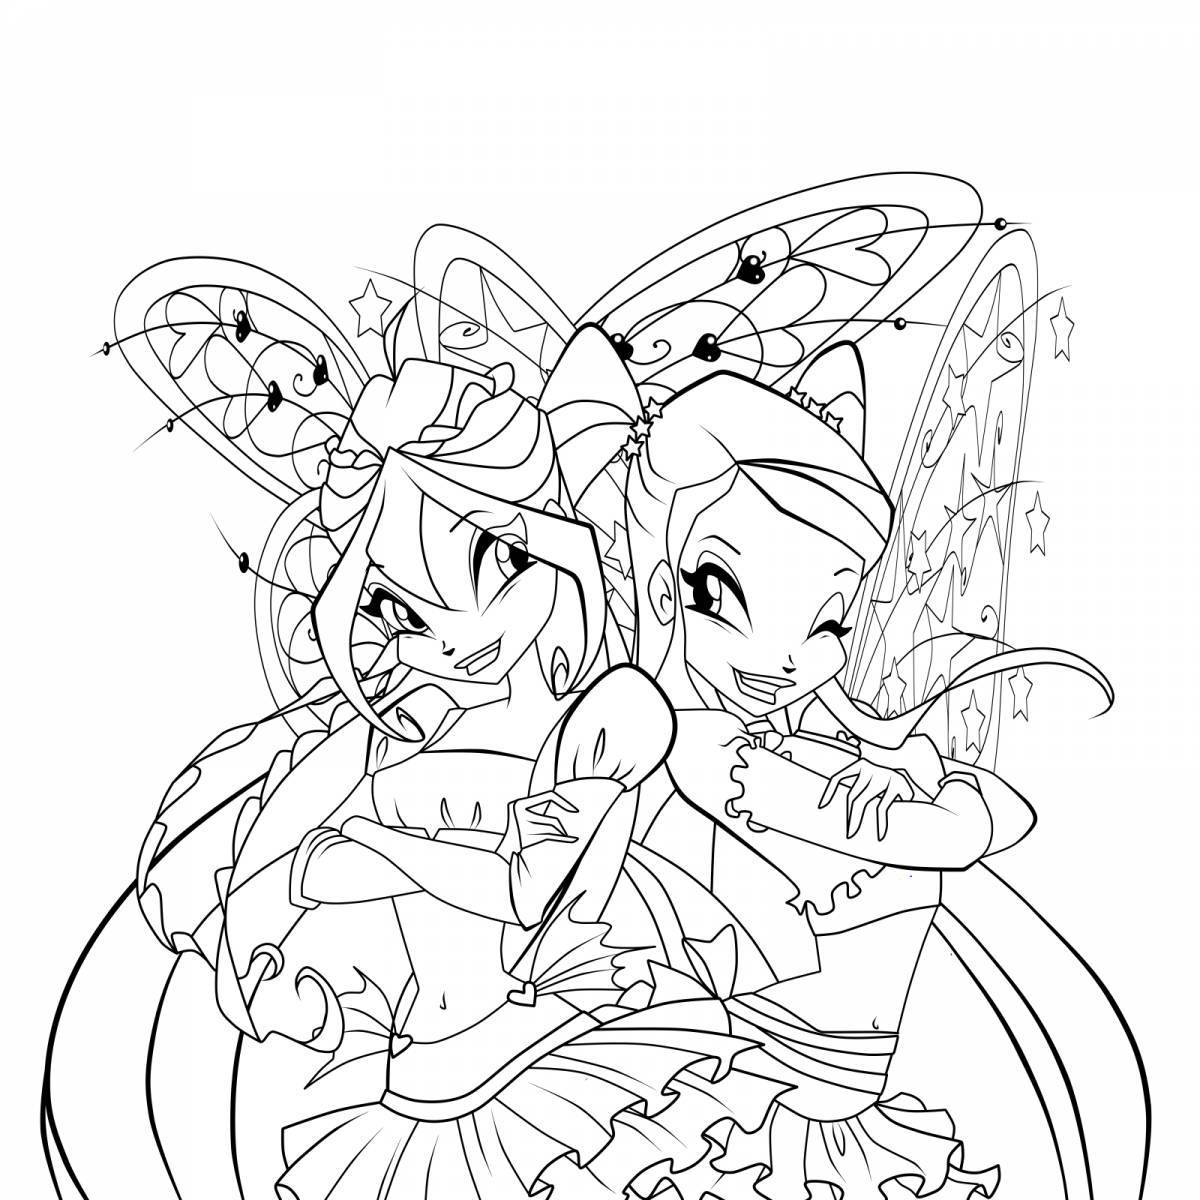 Outstanding winx club coloring page